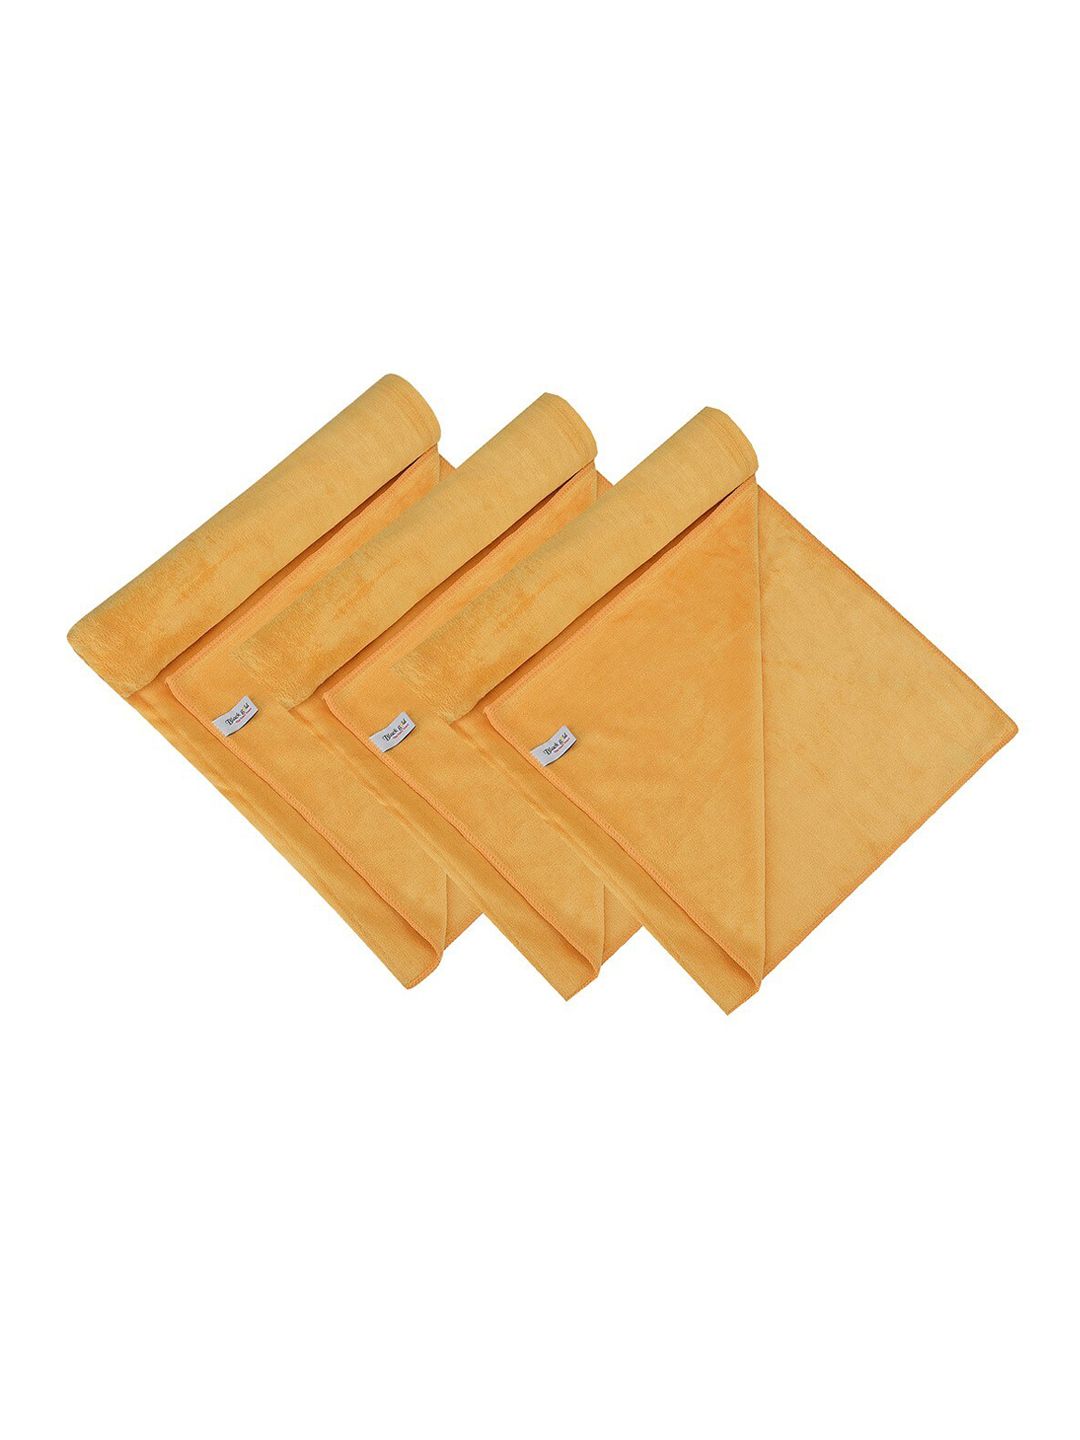 Black gold Set Of 3 Solid 400 GSM Microfiber Bath Towels Price in India